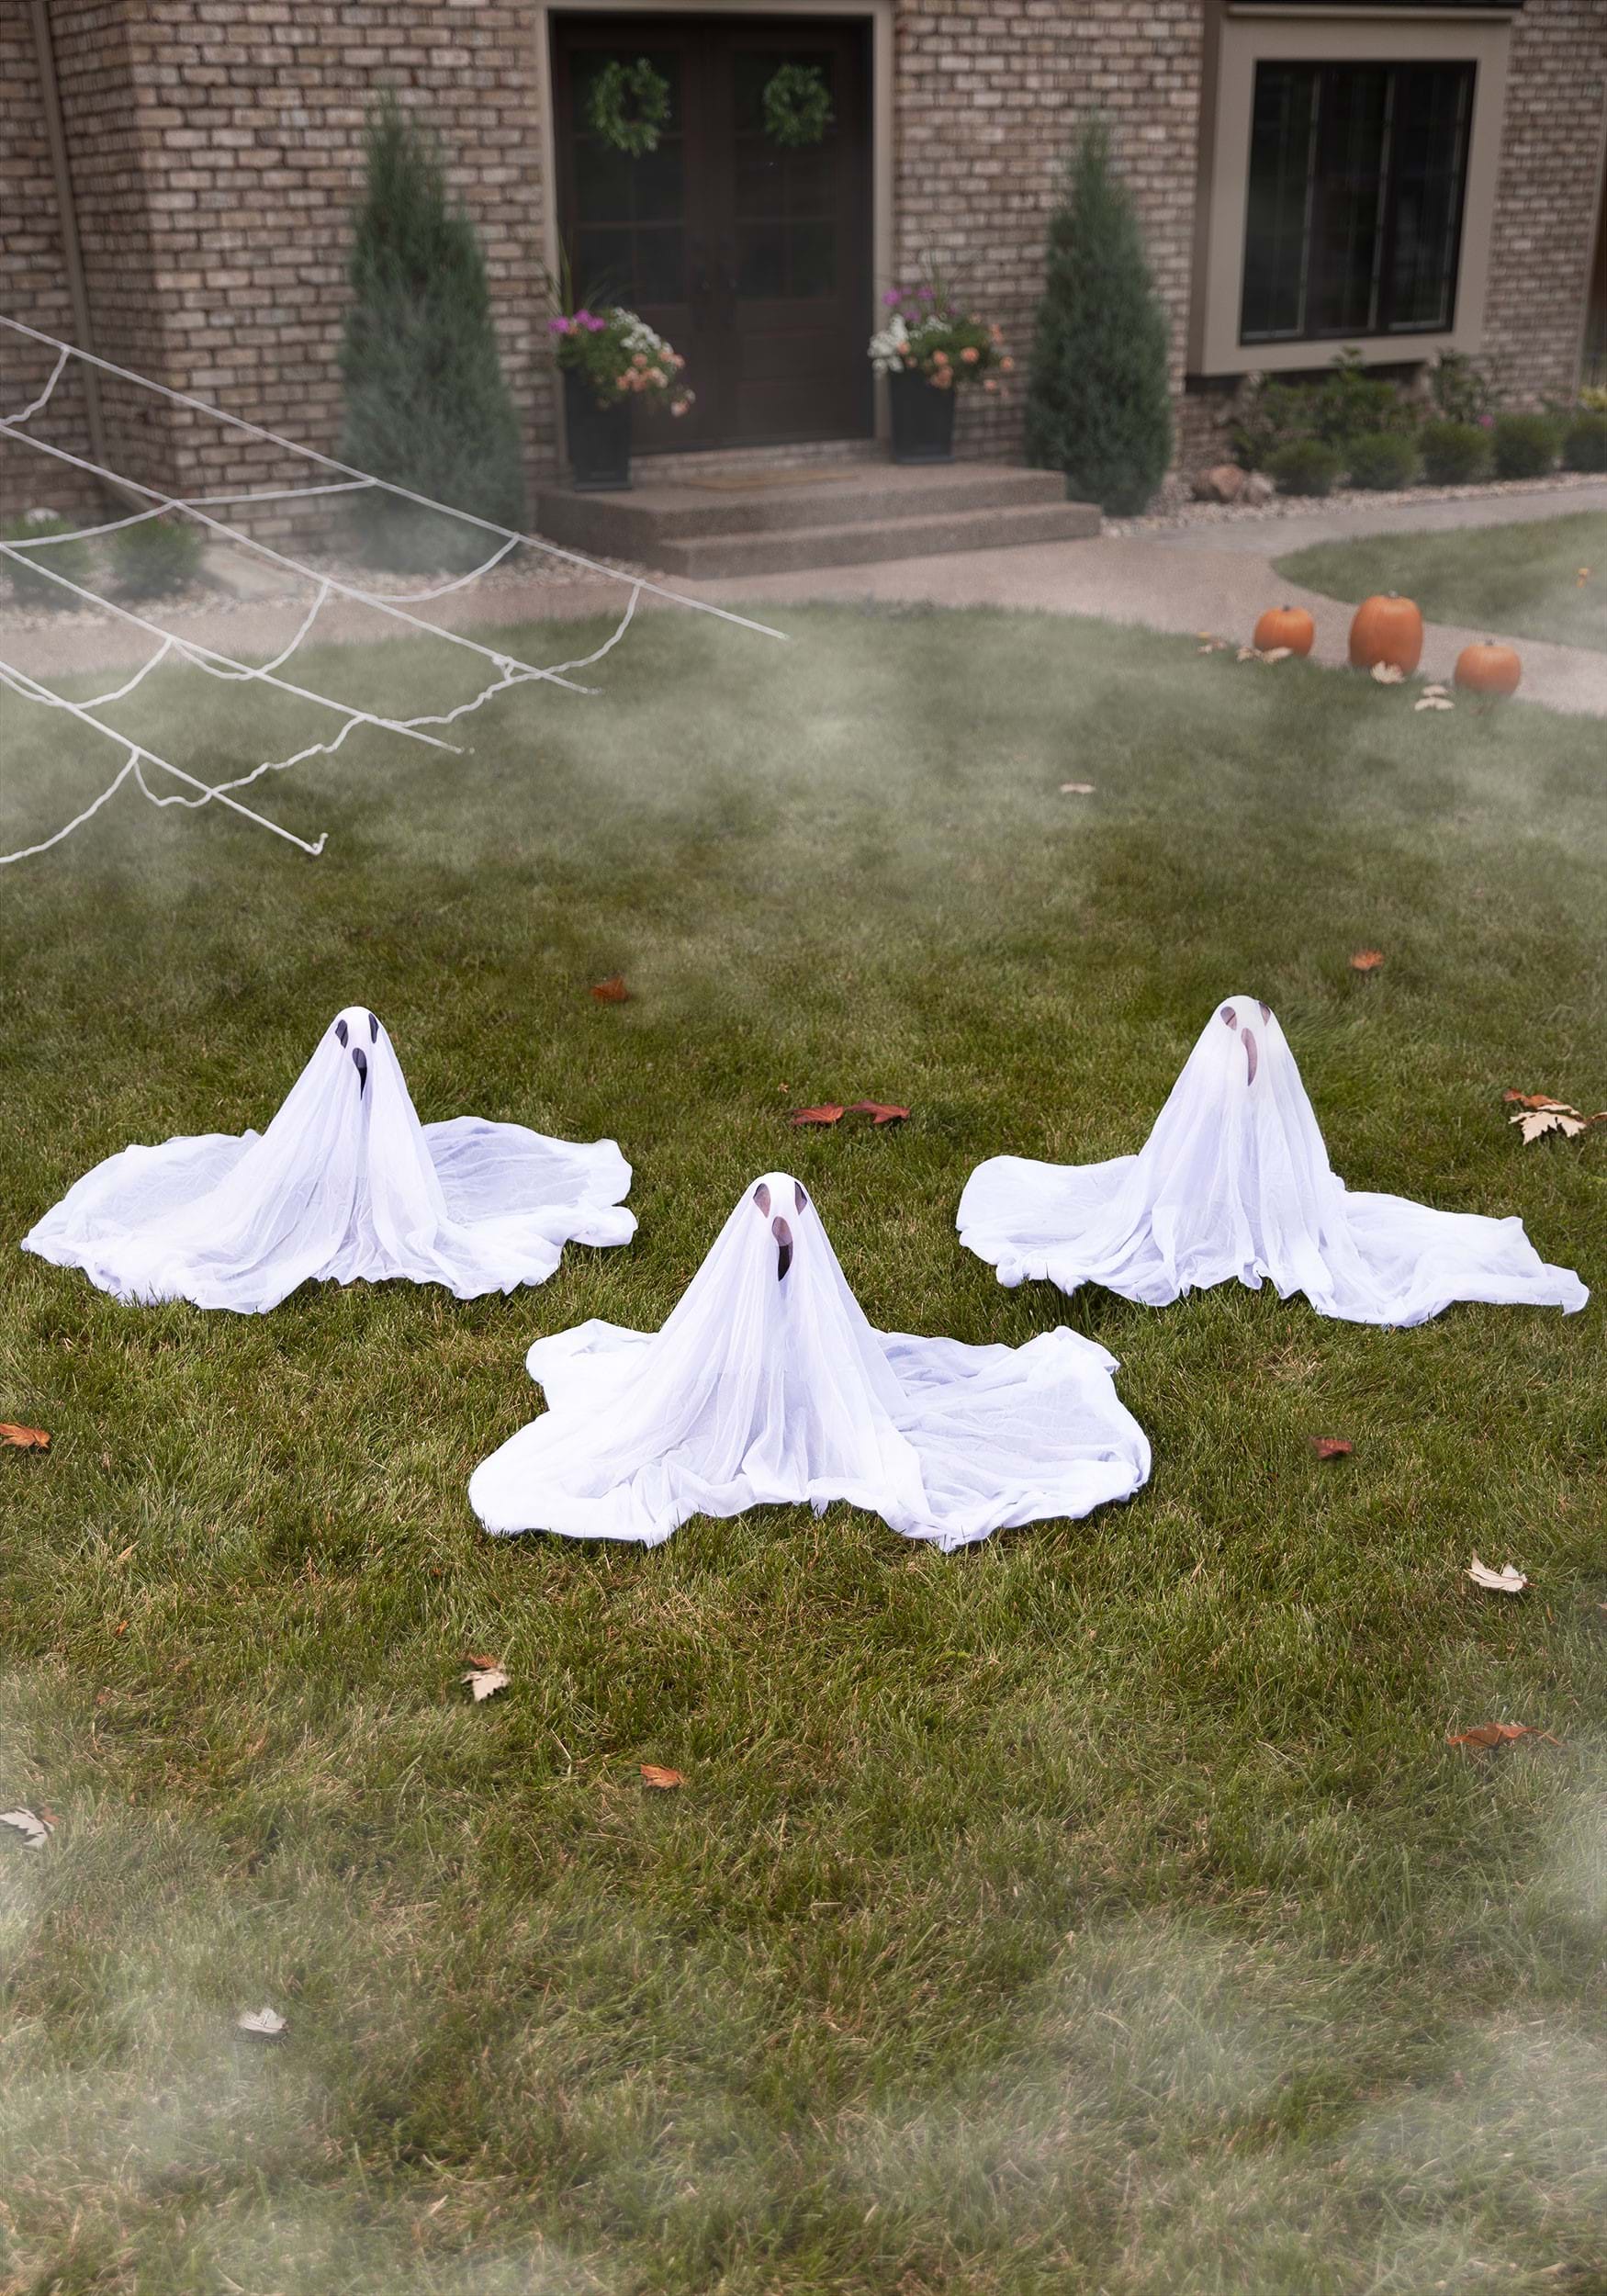 Ghostly Group Set Of Three - Ghost Decorations, Halloween Yard Decorations